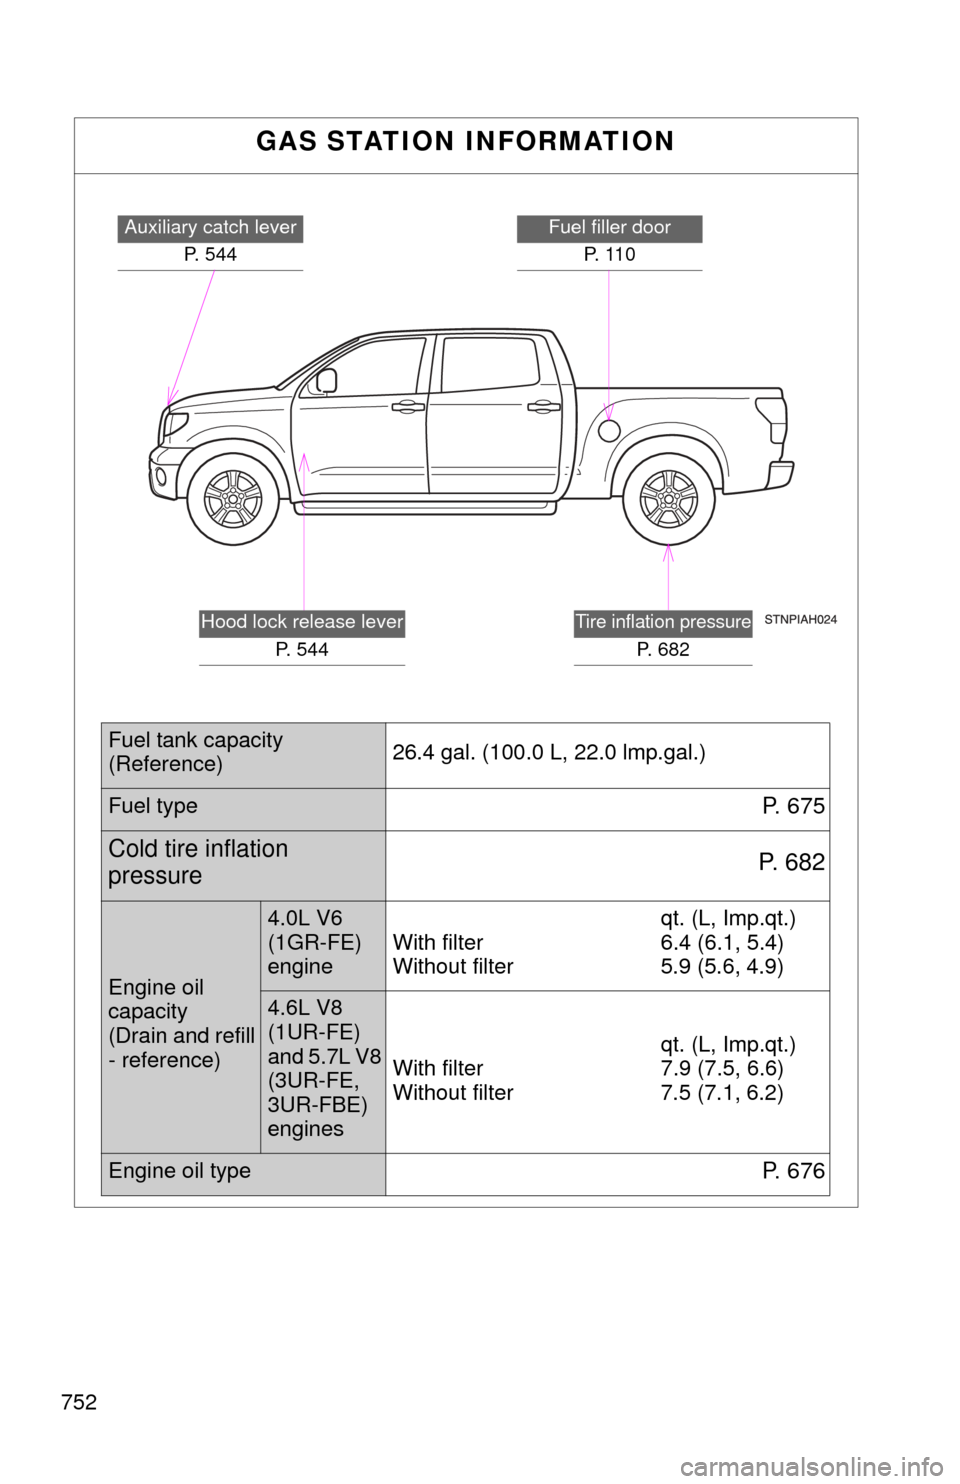 TOYOTA TUNDRA 2013 2.G Service Manual 752
GAS STATION INFORMATION
Auxiliary catch leverP. 544Fuel filler doorP.  1 1 0
Tire inflation pressure
P. 682
Hood lock release lever P. 544
Fuel tank capacity
(Reference) 26.4 gal. (100.0 
L, 22.0 